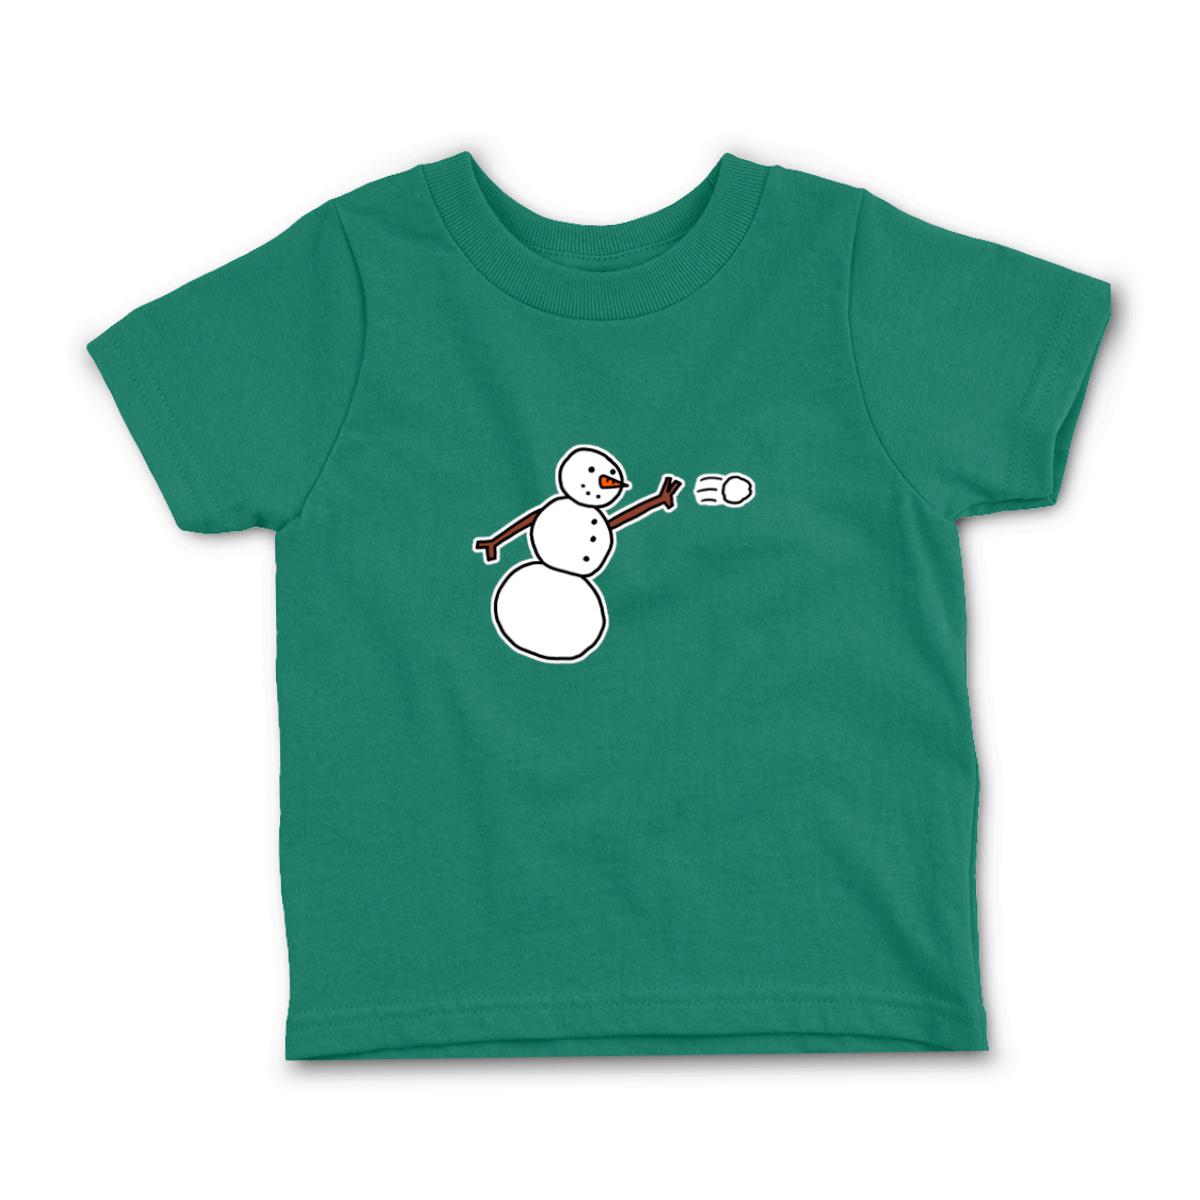 Snowman Throwing Snowball Toddler Tee 56T kelly